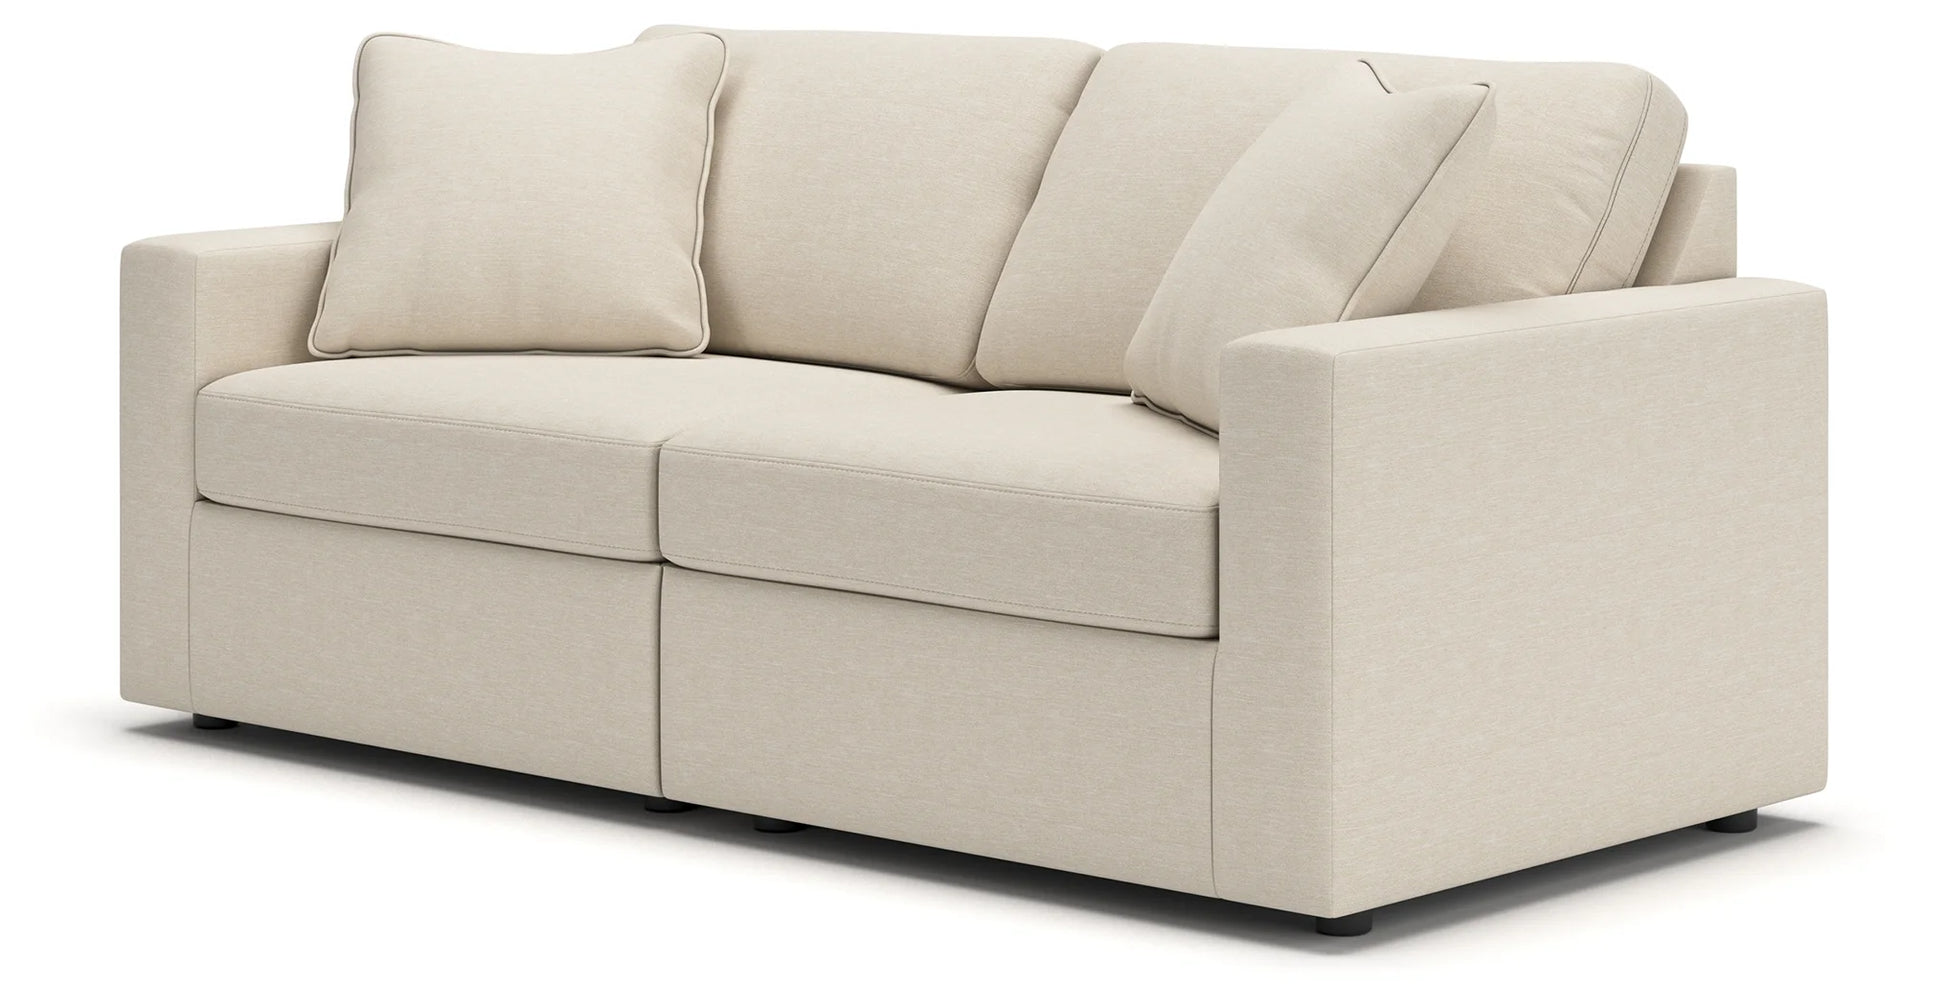 Modmax - Oyster - 2-Piece Sectional 2